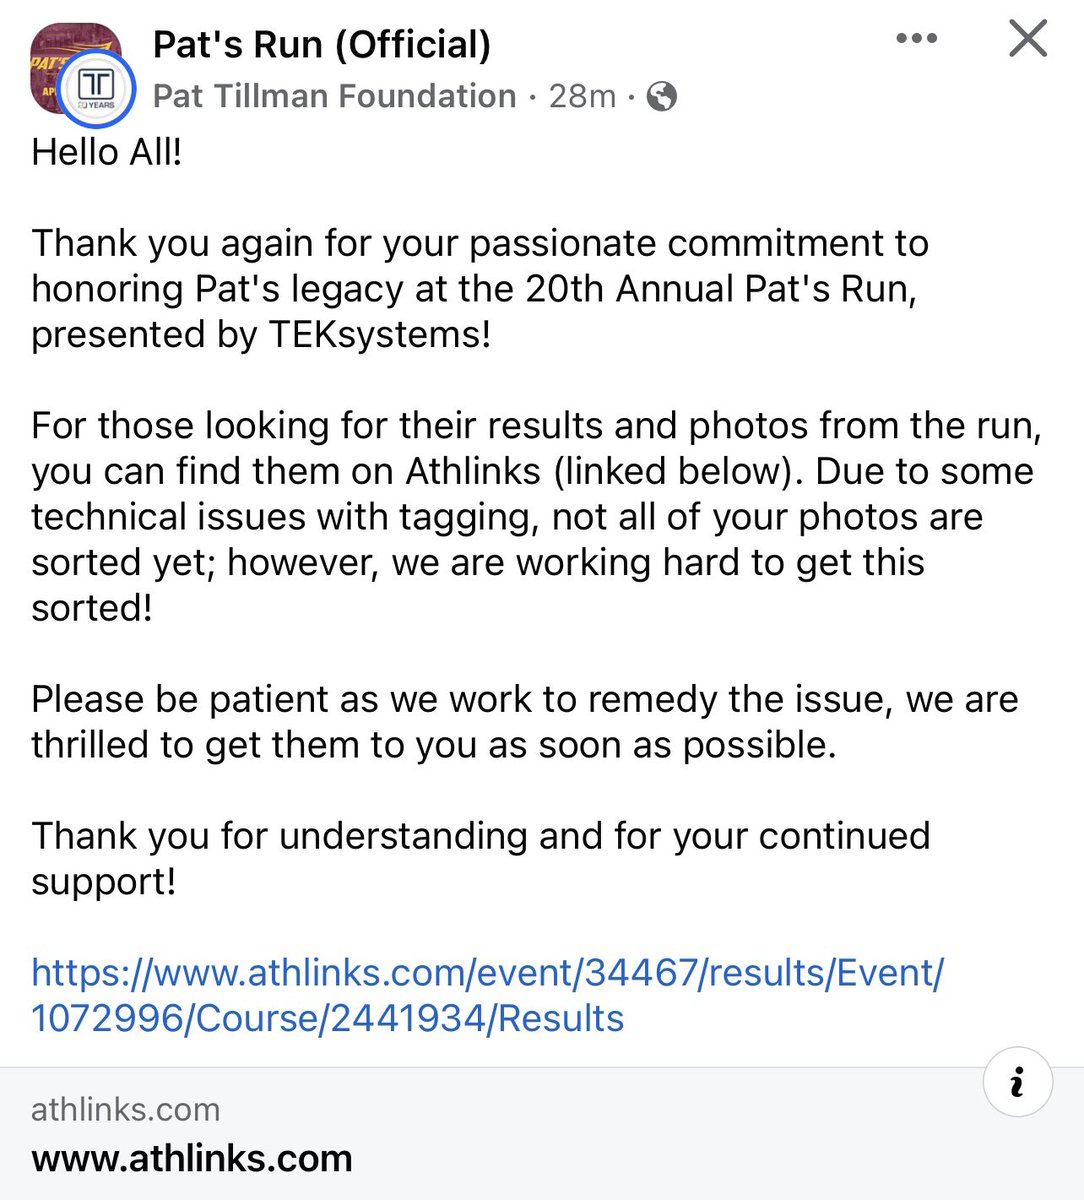 #PatsRun24 photo update from the @pattillmanfnd! Thanks to everyone behind the scenes making this happen! Find your photos (by entering name/bib #) here: athlinks.com/event/34467/re… #PatsRun #PT42 #Honor42 @DougTammaro @SFsundevil @baldspartan @MunnyBall @ASU_Alumni @TEKsystems 😈🔱